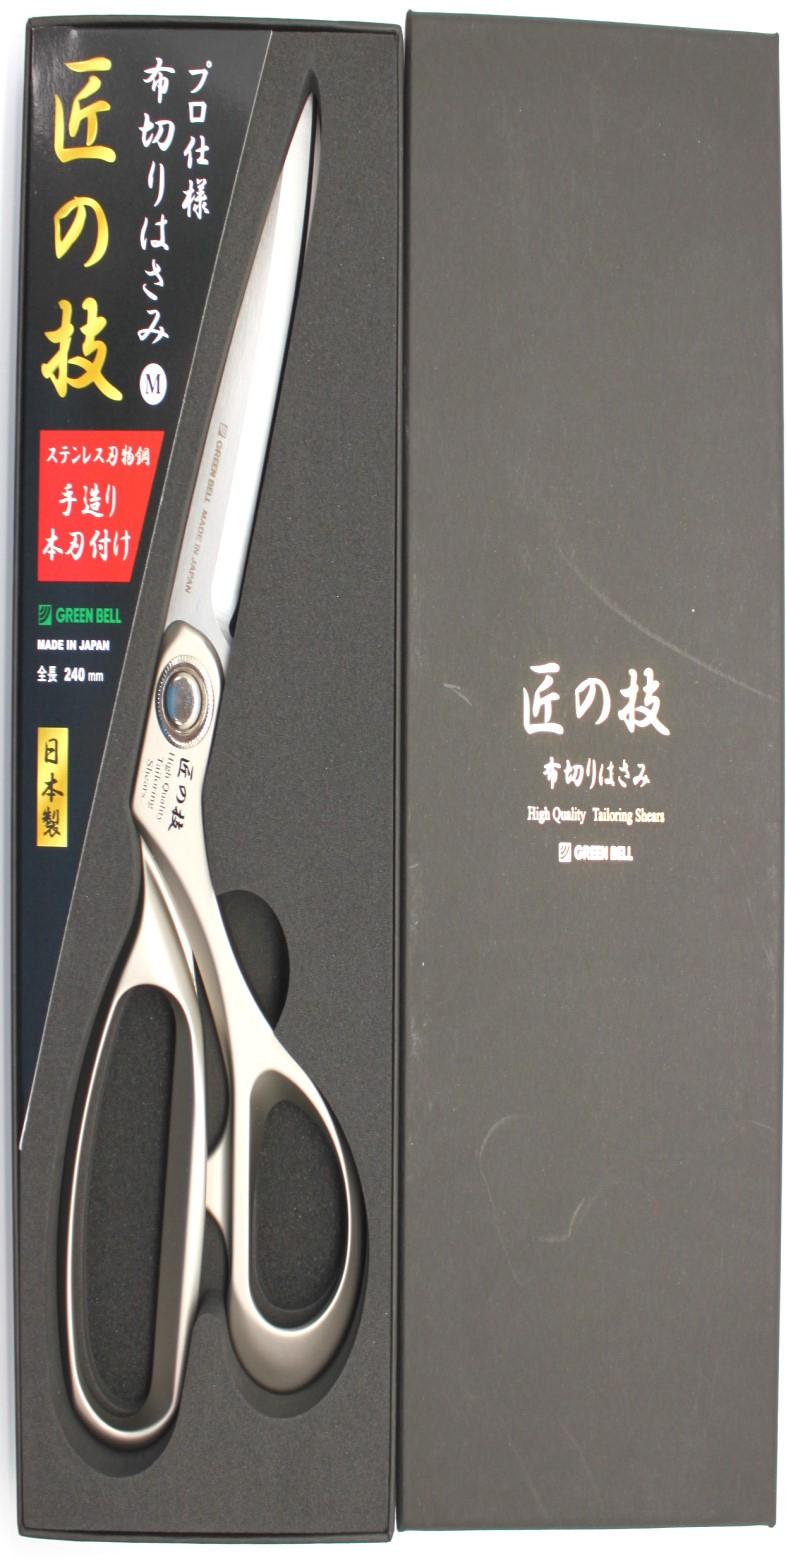 HIGH QUALITY TAILORING SCISSORS - GREENBELL G-5100 HIGH QUALITY TAILORING SCISSORS 210 MM Provide smooth cutting Stainless steel 210 mm ITEM NO: